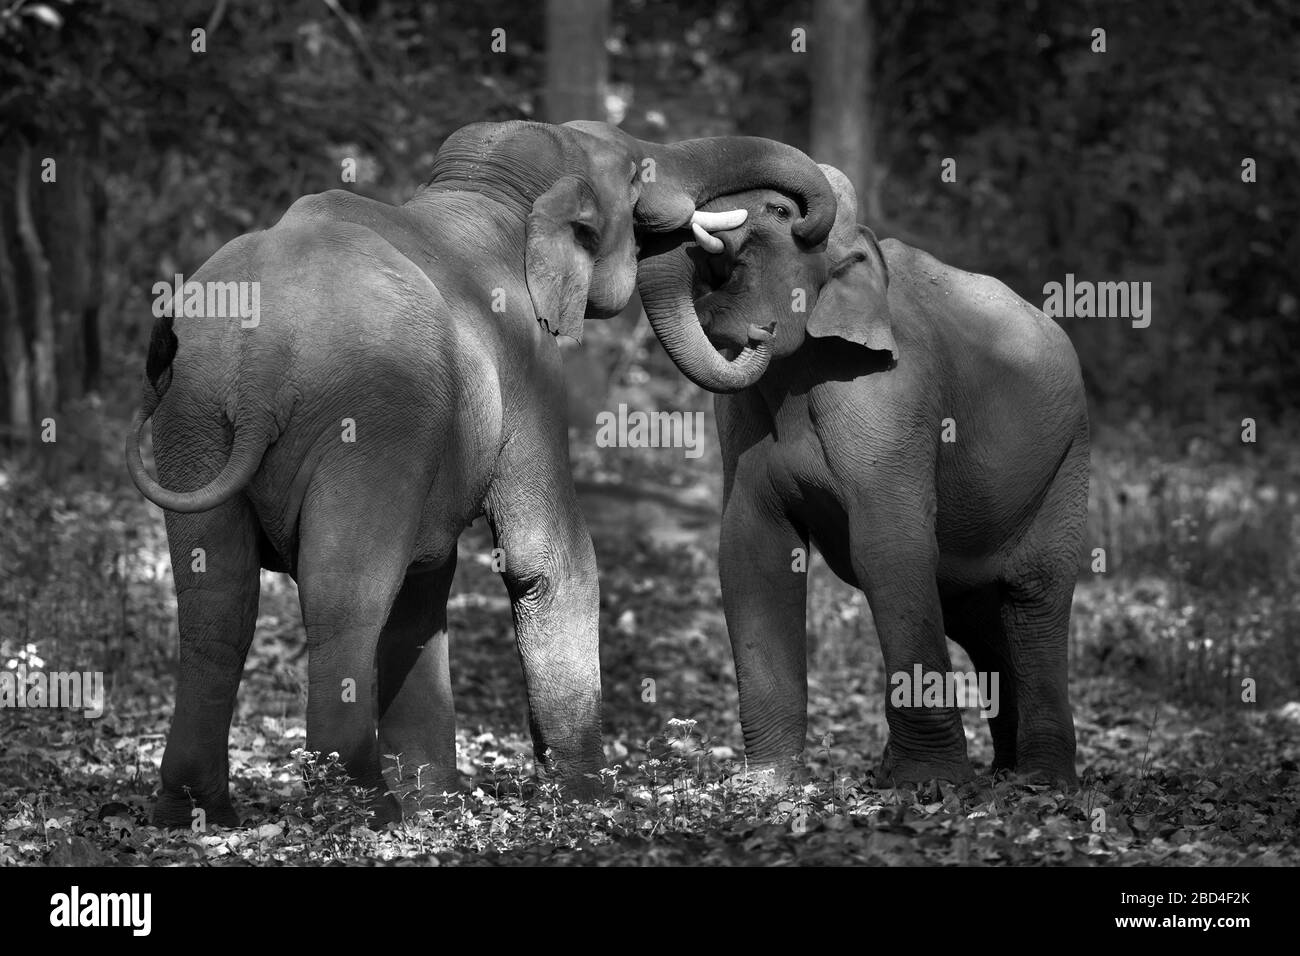 The image of Asian elephant (Elephas maximus) Tuskers fighting in Corbett national park, India,Asia Stock Photo